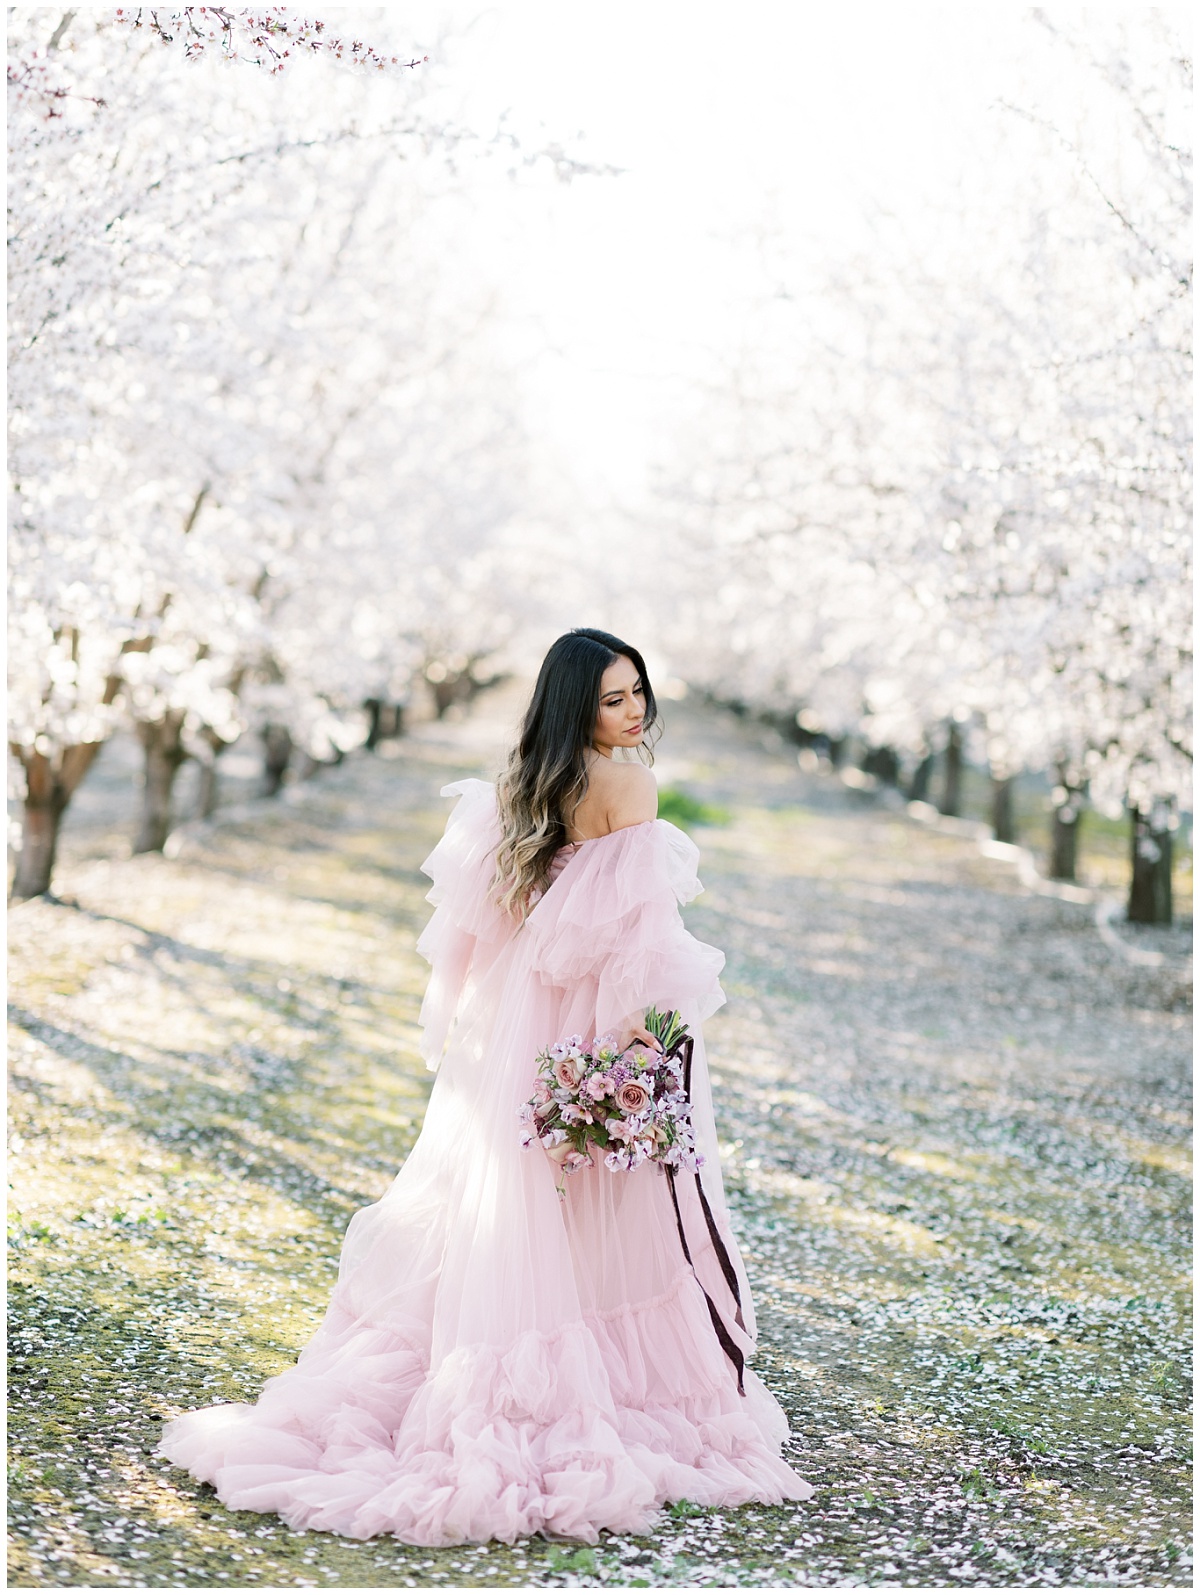 Ethereal Almond Orchard Photos